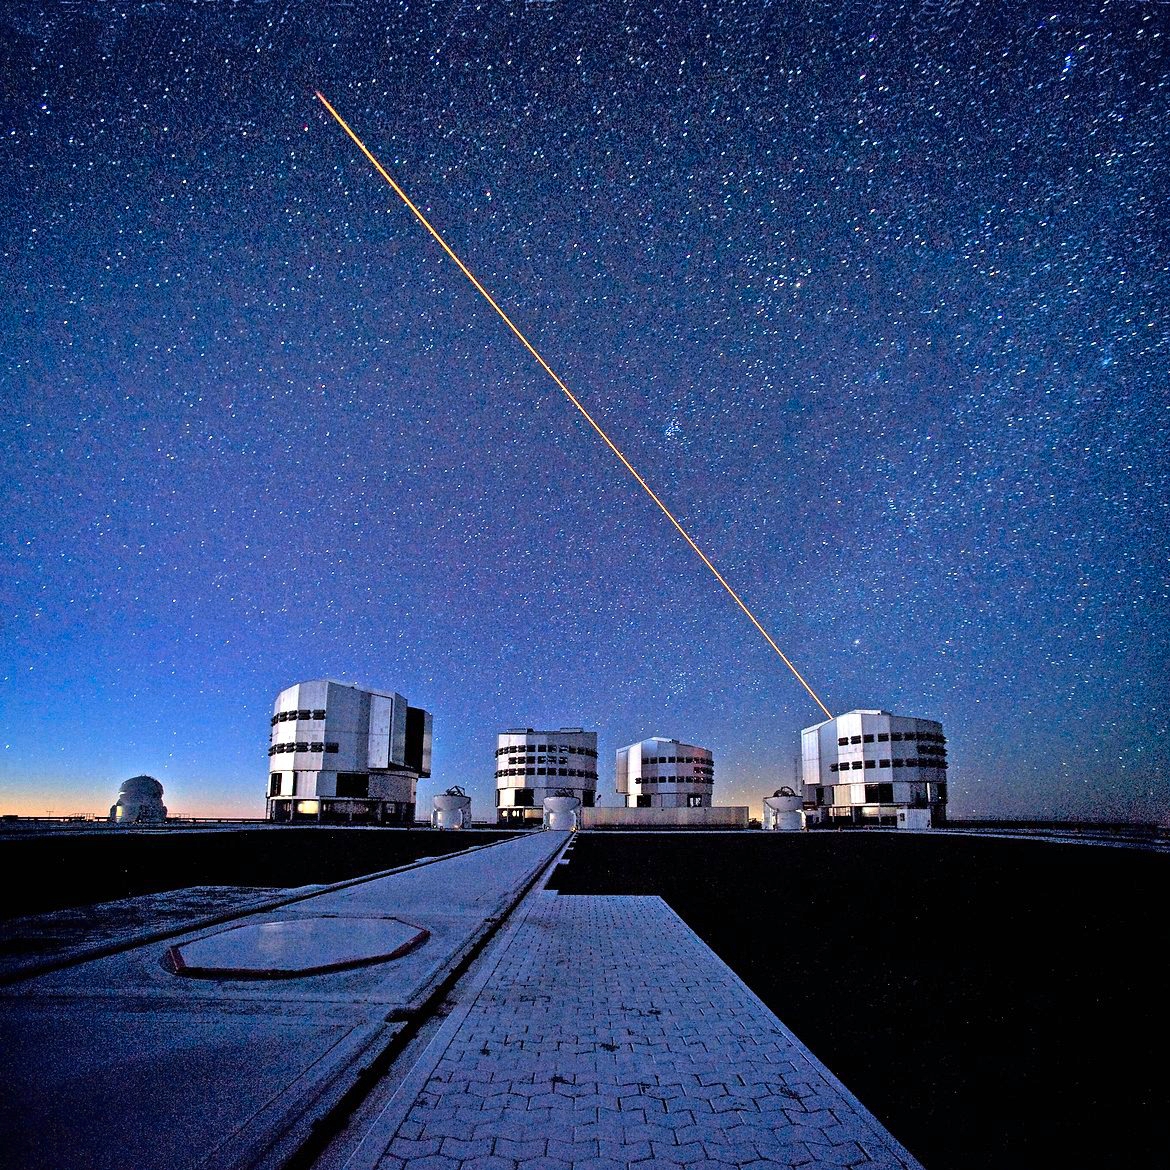 The ESO Very Large Telescope (VLT) during observations. In this picture, taken from the VLT platform looking north-northwest at twilight, the four 8.2-metre Unit Telescopes (UTs) are visible. From left to right, Antu, Kueyen, Melipal and Yepun, the Mapuche names for the VLT's giant telescopes. In front of the UTs are the four 1.8-metre Auxiliary Telescopes (ATs), entirely dedicated to interferometry, a technique which allows astronomers to see details up to 25 times finer than with the individual telescopes. The configuration of the ATs can be changed by moving them across the platform between 30 different observing positions. One of these positions is visible in the foreground, covered by a hexagonal pad. A reddish laser beam is being launched from UT4 (Yepun) to create an artificial star at an altitude of 90 km in the Earth´s mesosphere. This Laser Guide Star (LGS) is part of the Adaptive Optics system, which allows astronomers to remove the effects of atmospheric turbulence, produc